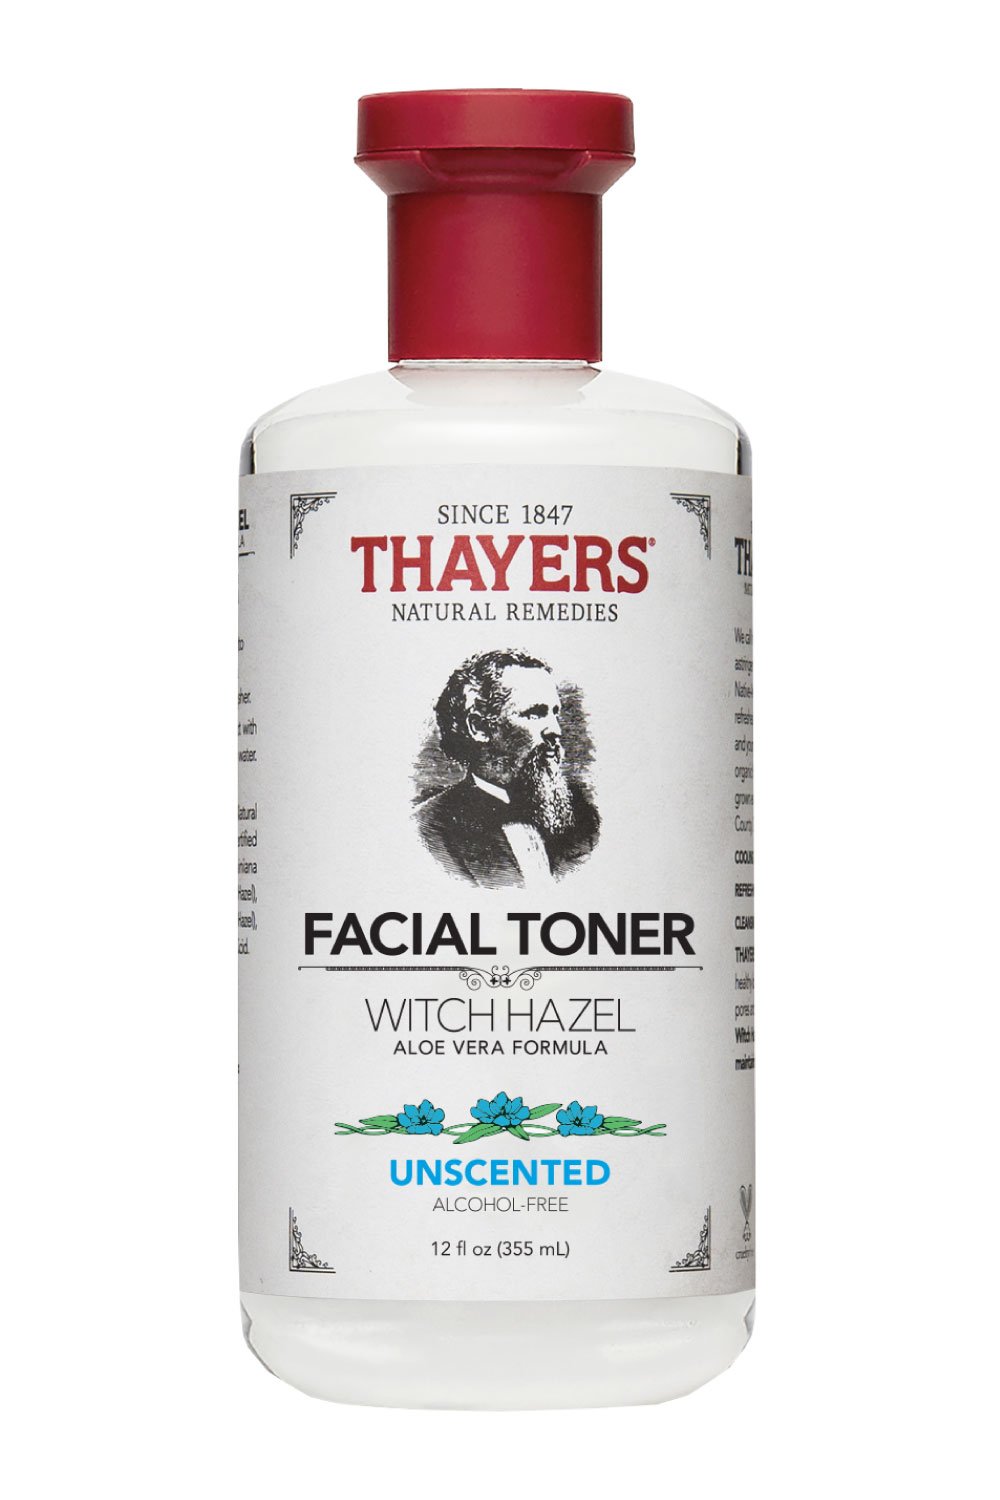 THAYERS FACIAL TONER UNSCENTED 355mL